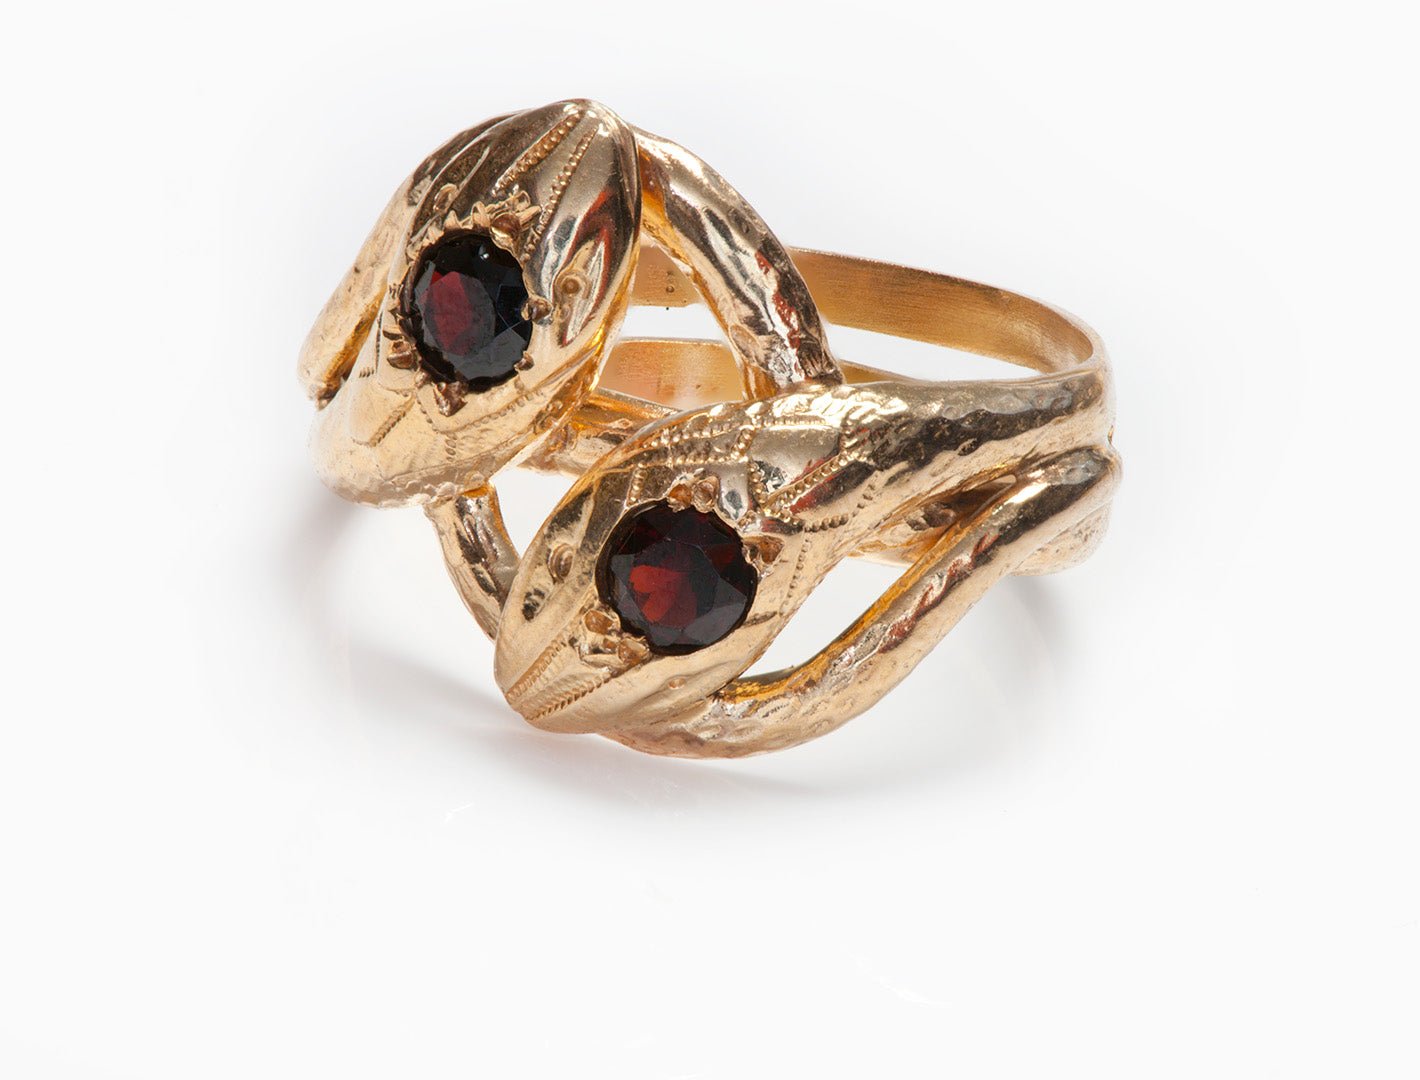 Antique Gold Garnet Snake Ring - DSF Antique Jewelry